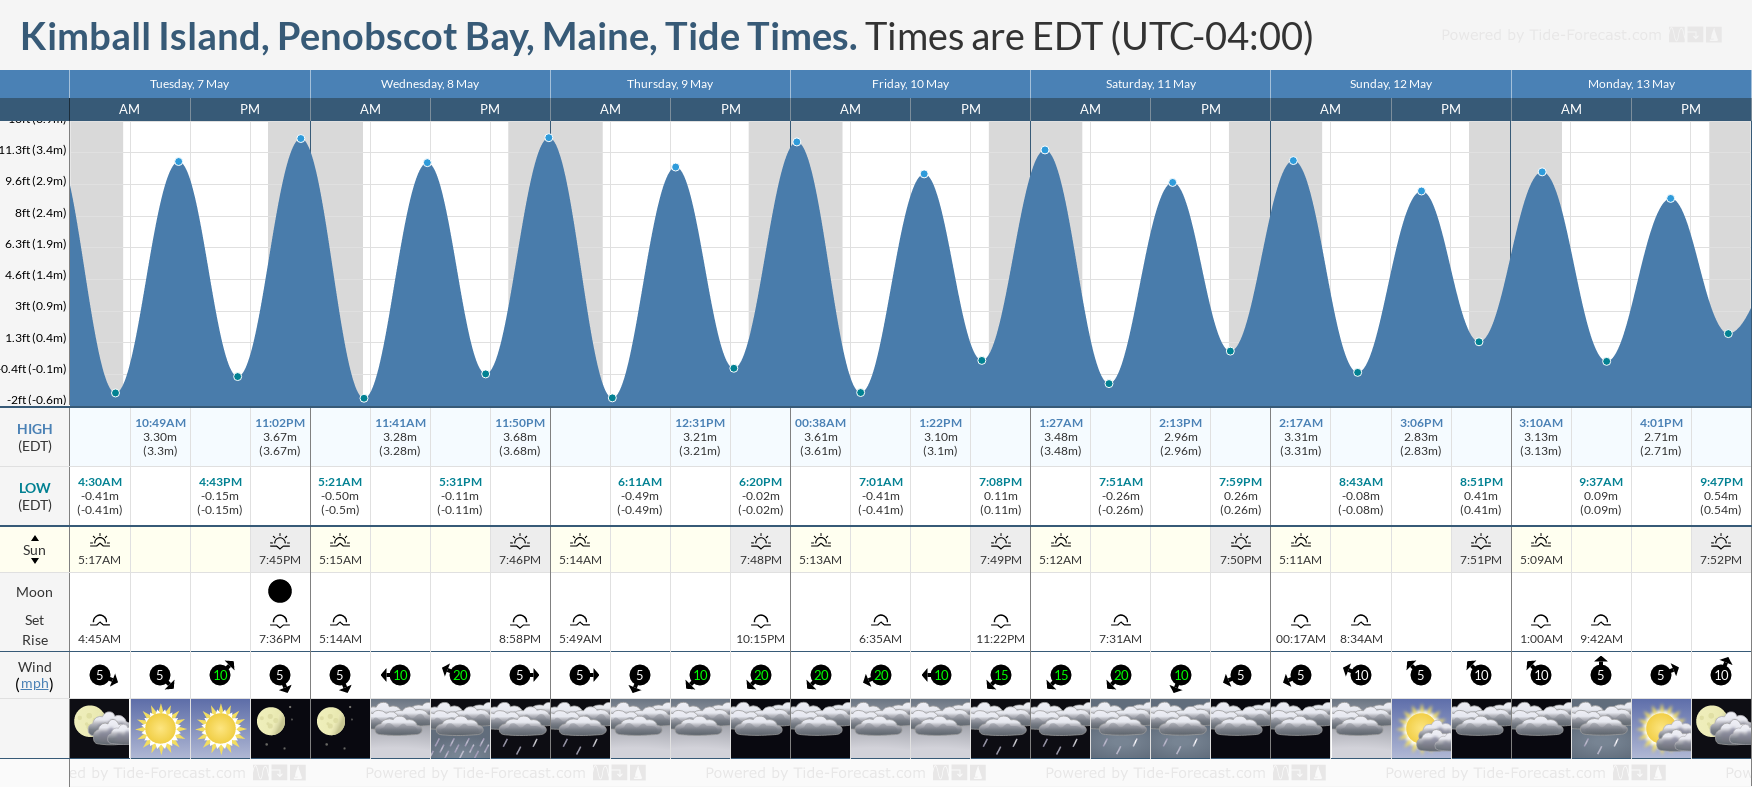 Kimball Island, Penobscot Bay, Maine Tide Chart including high and low tide tide times for the next 7 days